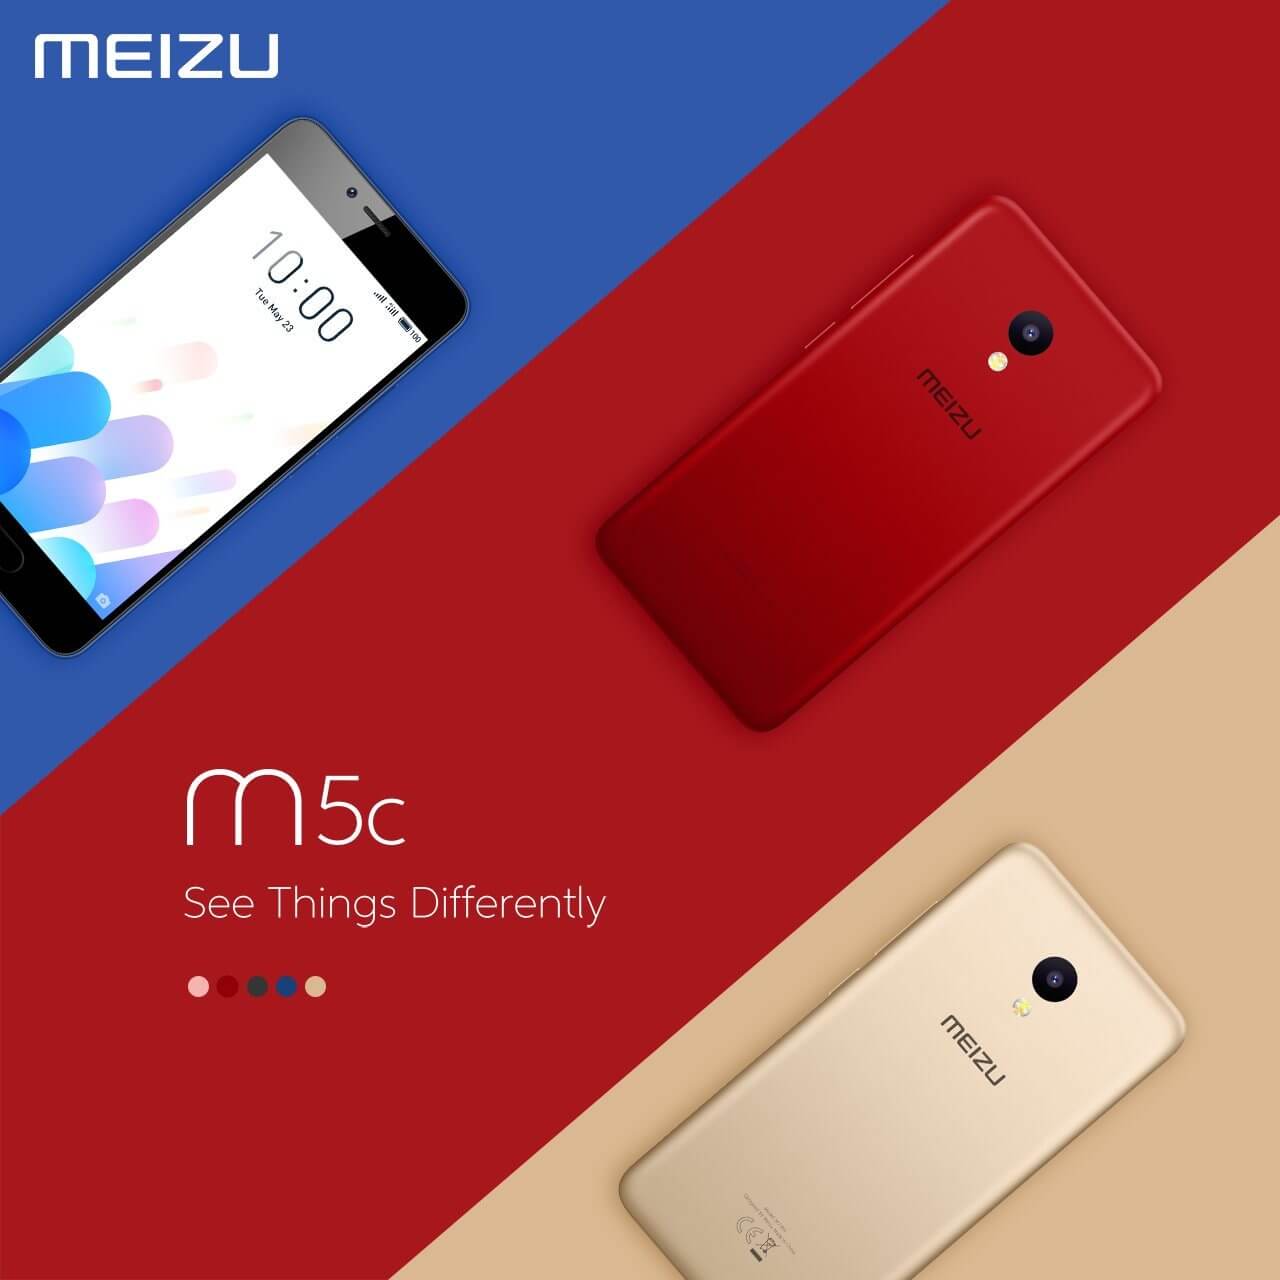 Meizu officially introduced M5c a budget smartphone for global market